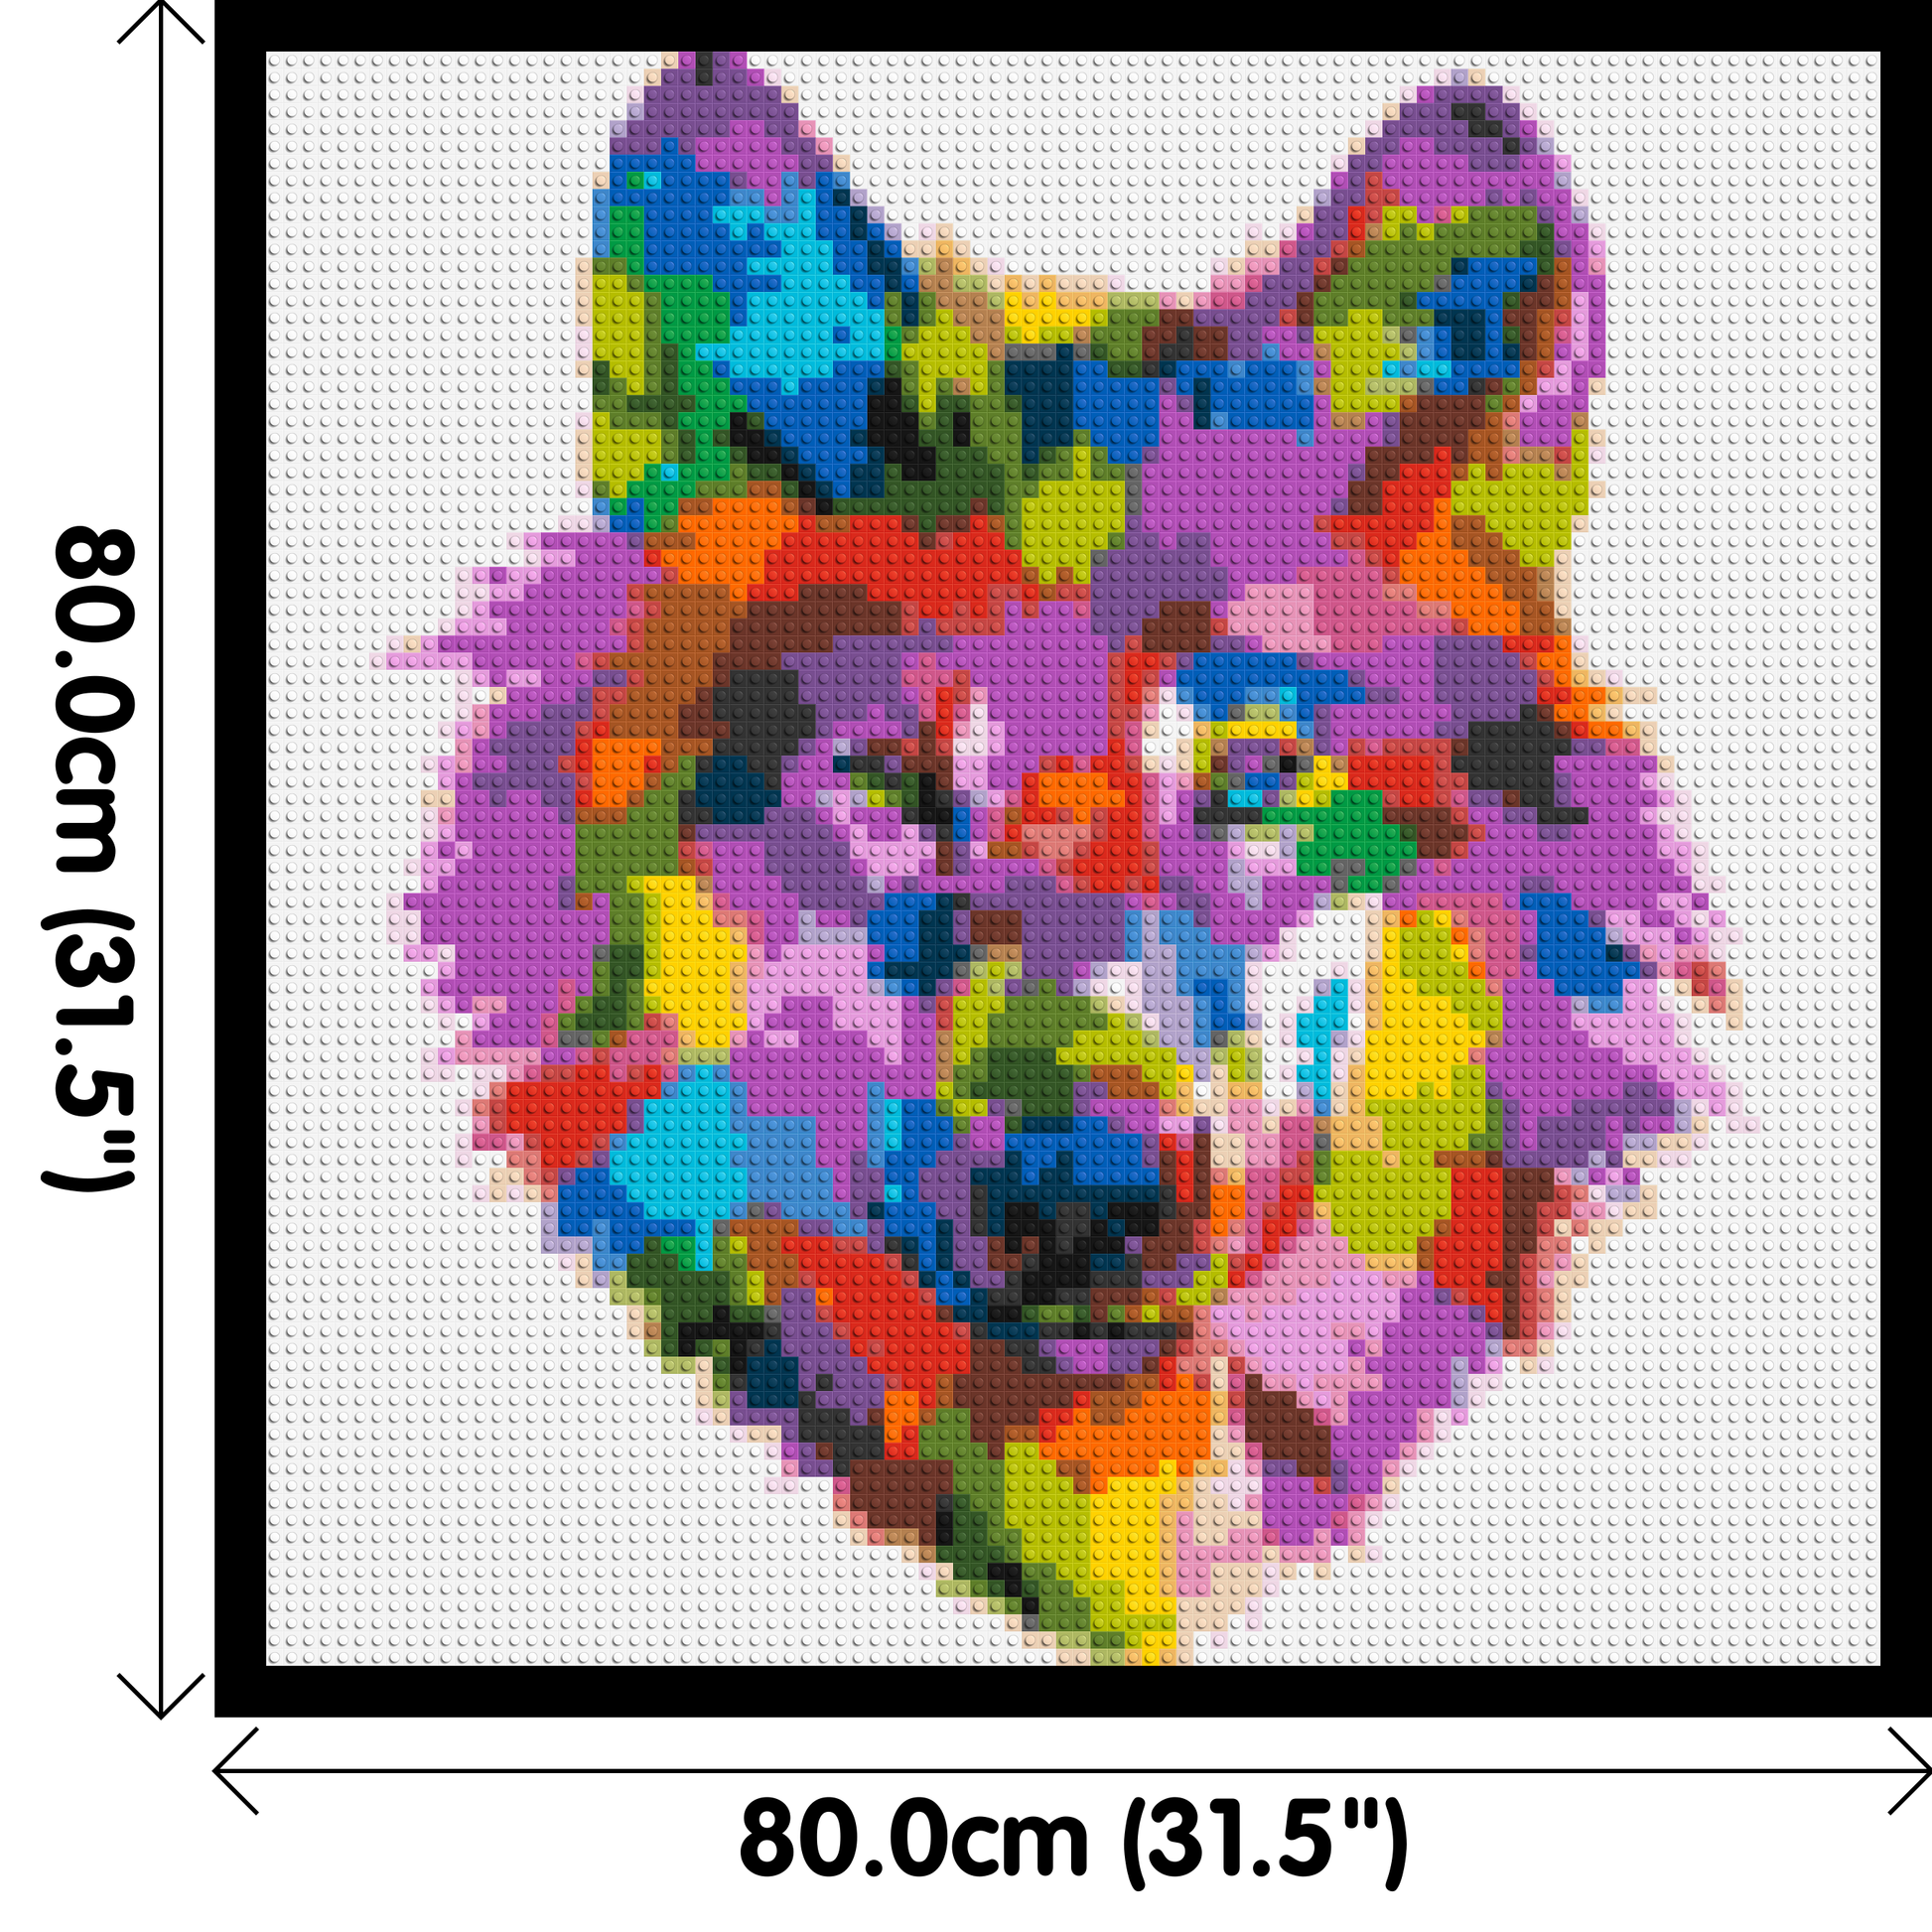 Wolf Colourful Pop Art - Brick Art Mosaic Kit 4x4 dimensions with frame